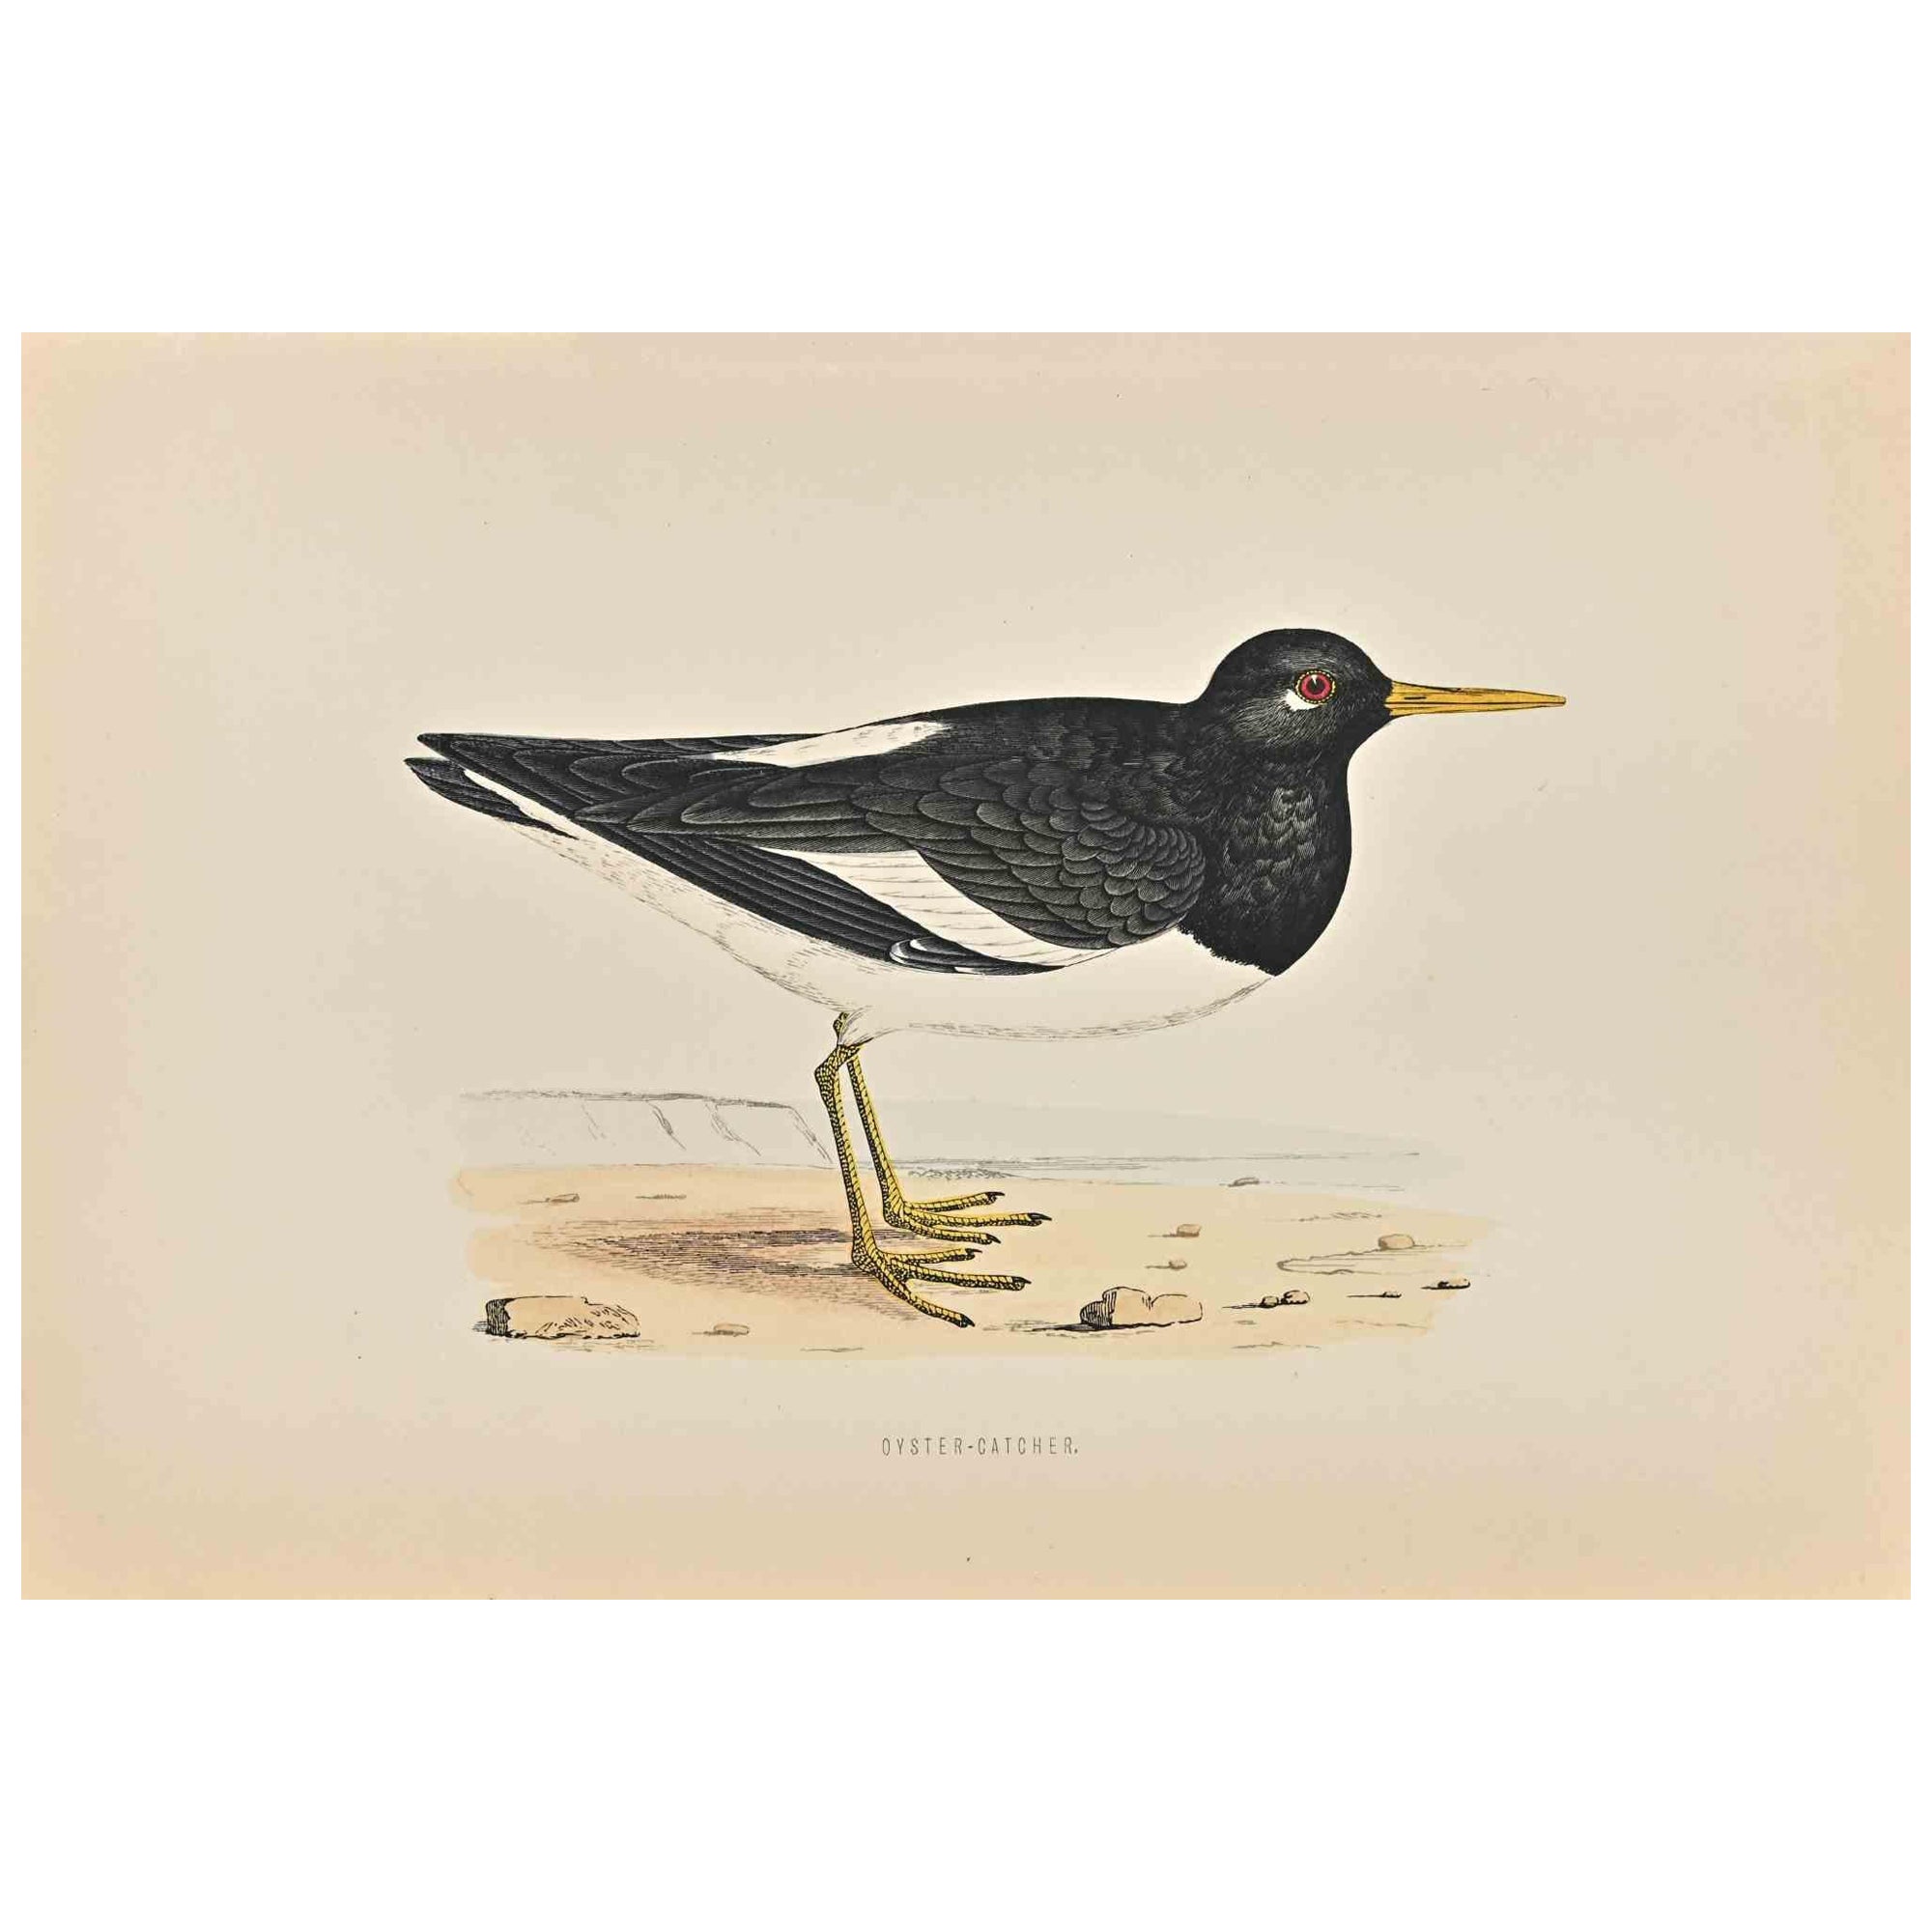 Oyster-Catcher is a modern artwork realized in 1870 by the British artist Alexander Francis Lydon (1836-1917).

Woodcut print on ivory-colored paper.

Hand-colored, published by London, Bell & Sons, 1870.  

The name of the bird is printed on the